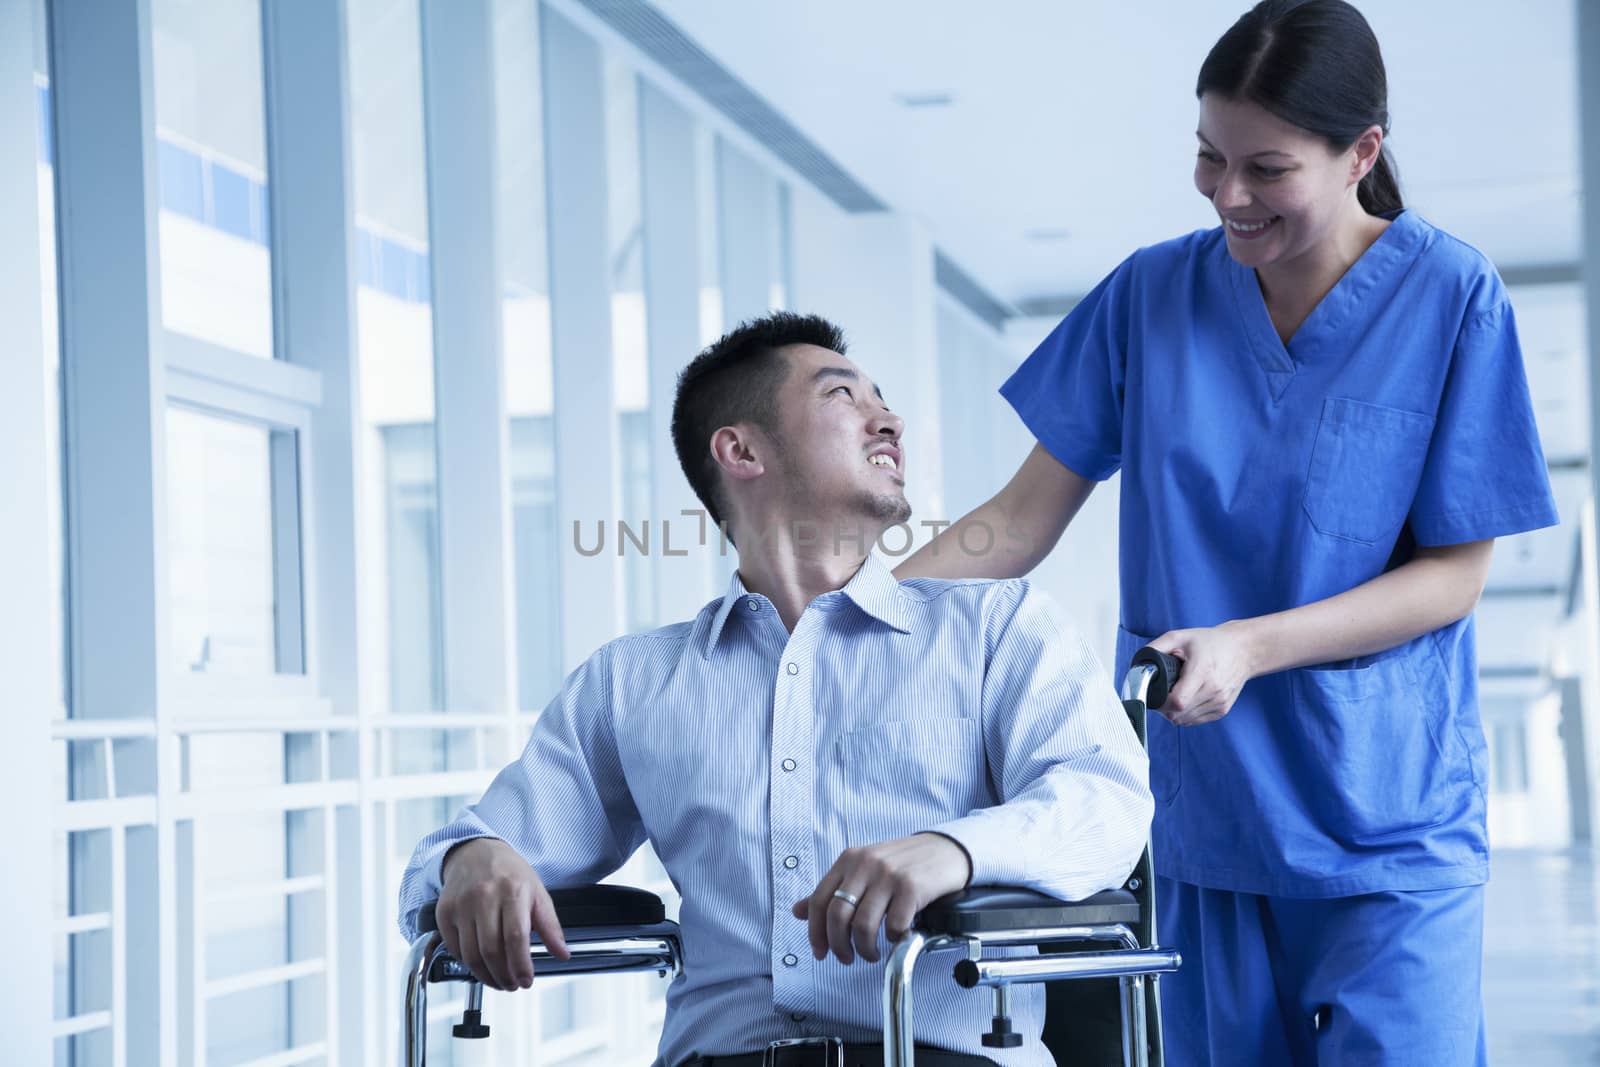 Smiling female nurse pushing and assisting patient in a wheelchair in the hospital 